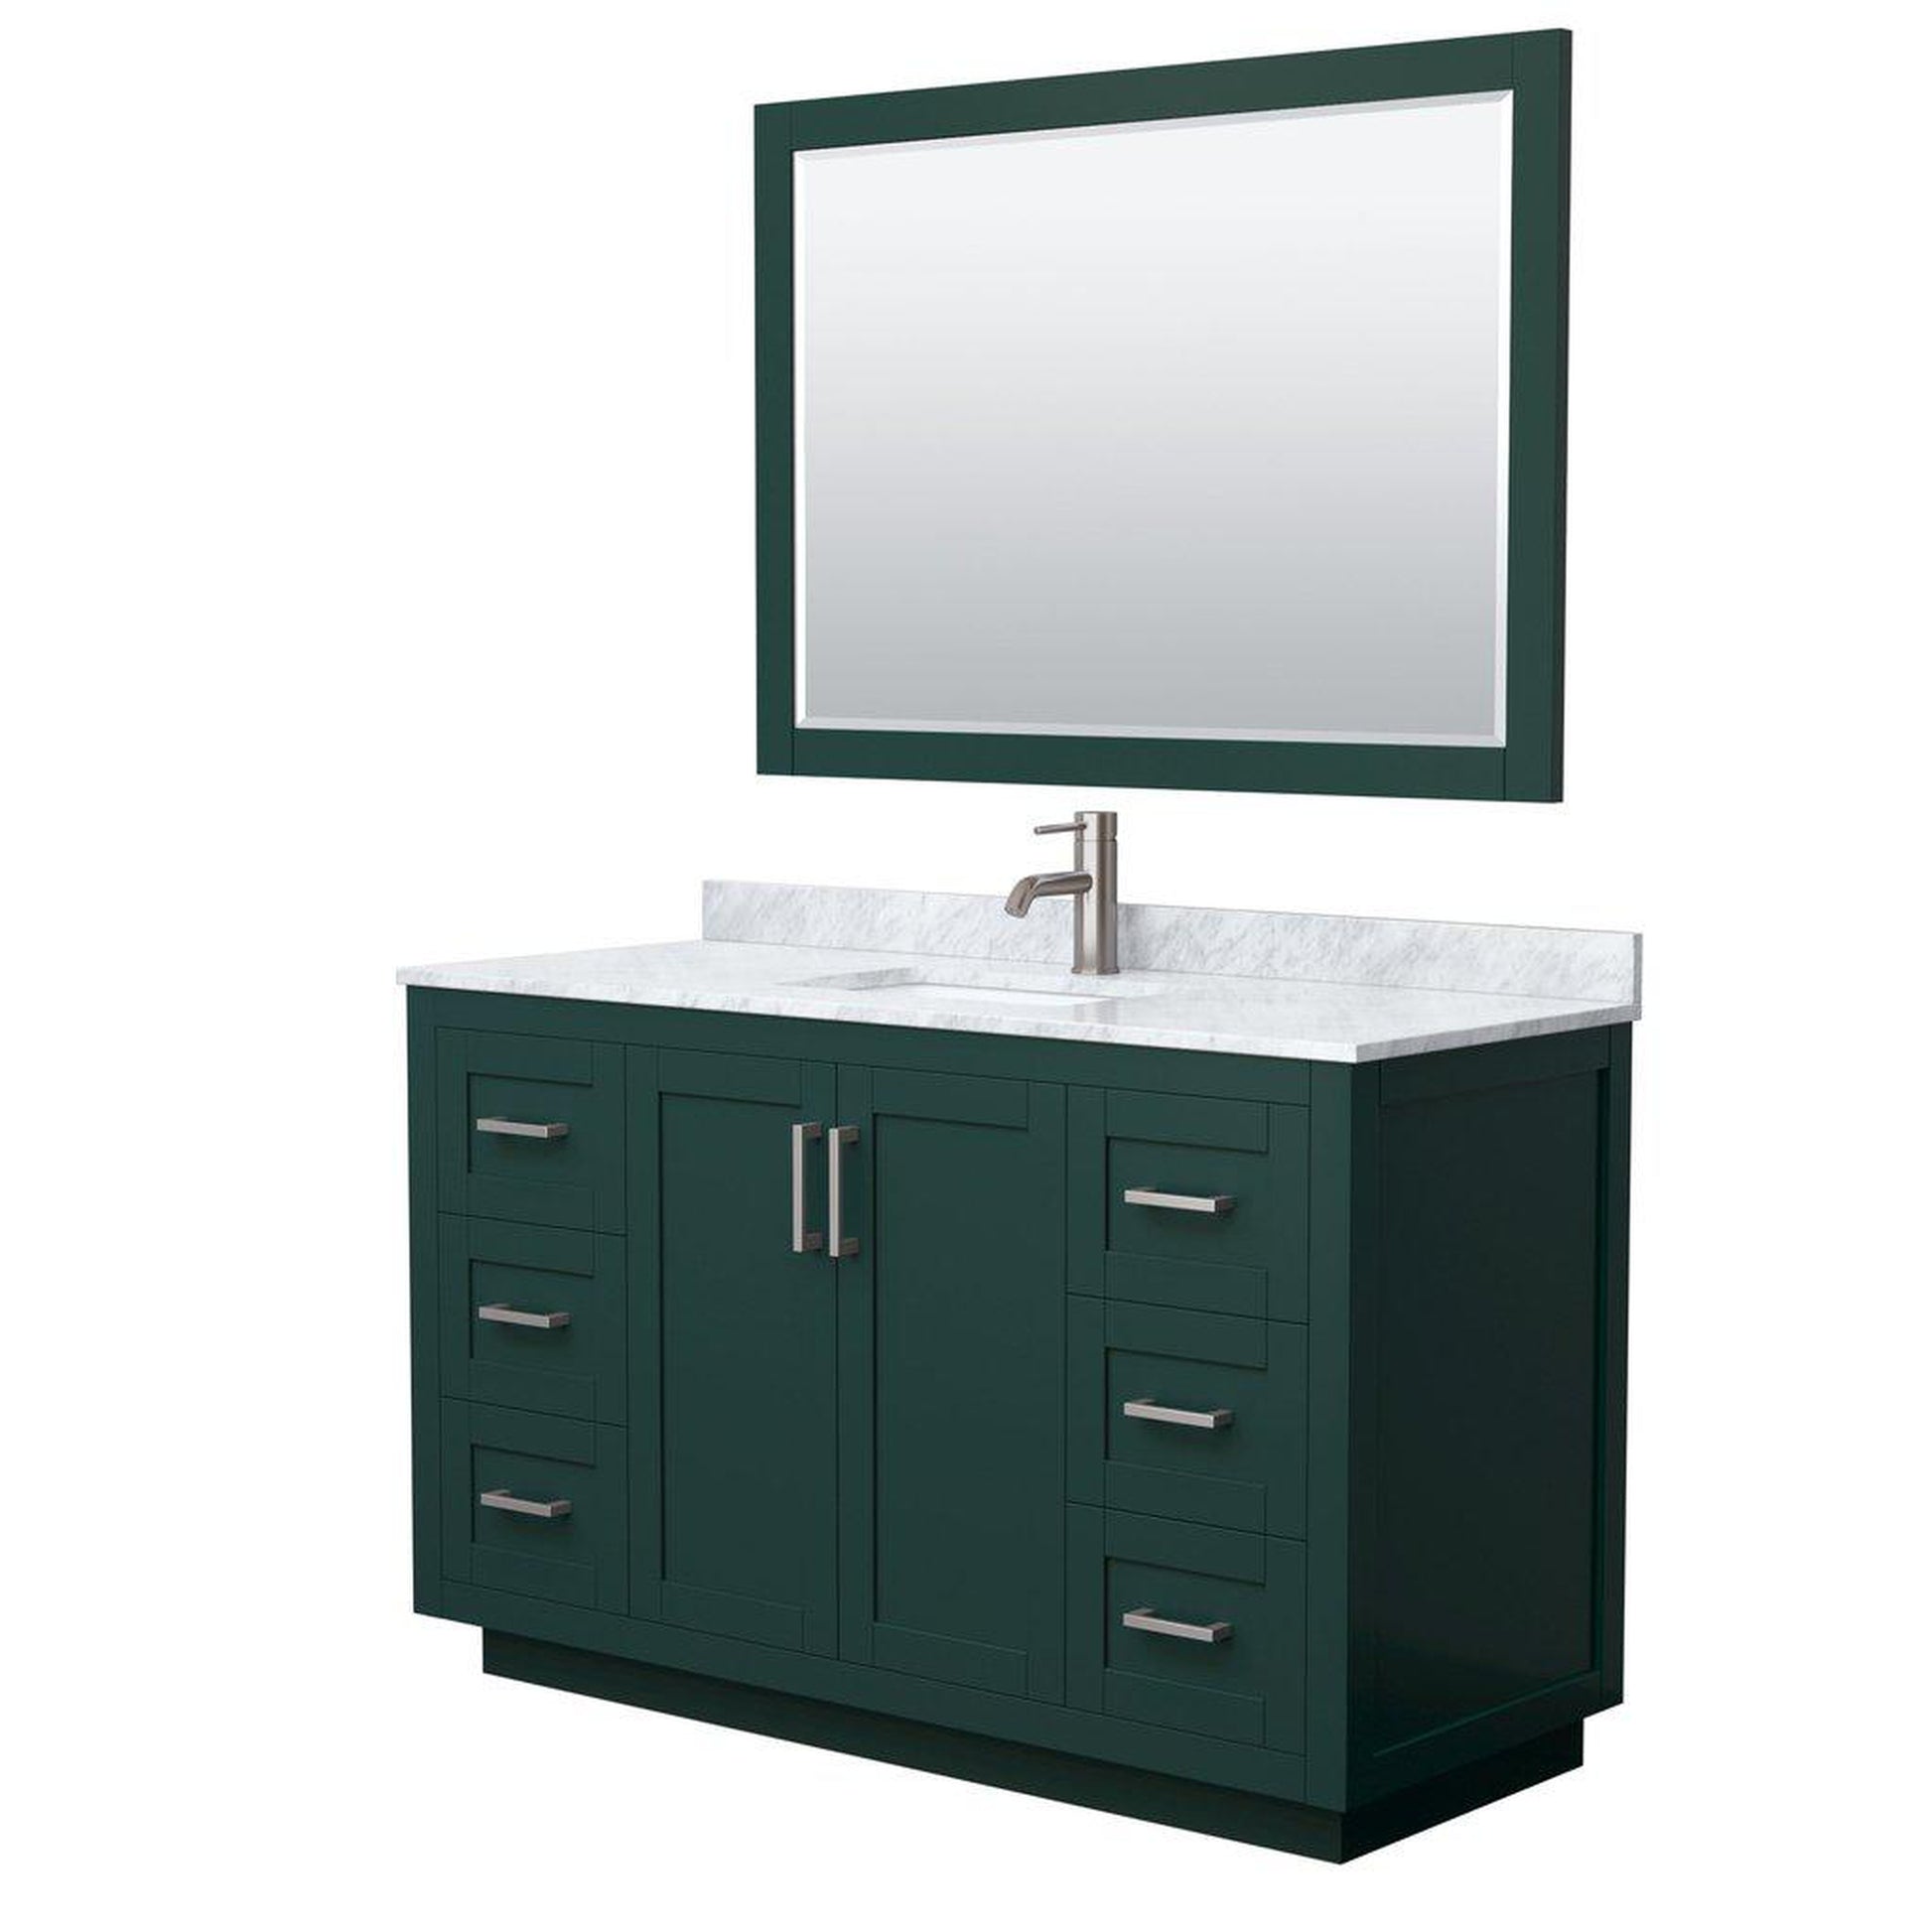 Wyndham Collection Miranda 54" Single Bathroom Green Vanity Set With White Carrara Marble Countertop, Undermount Square Sink, 46" Mirror And Brushed Nickel Trim